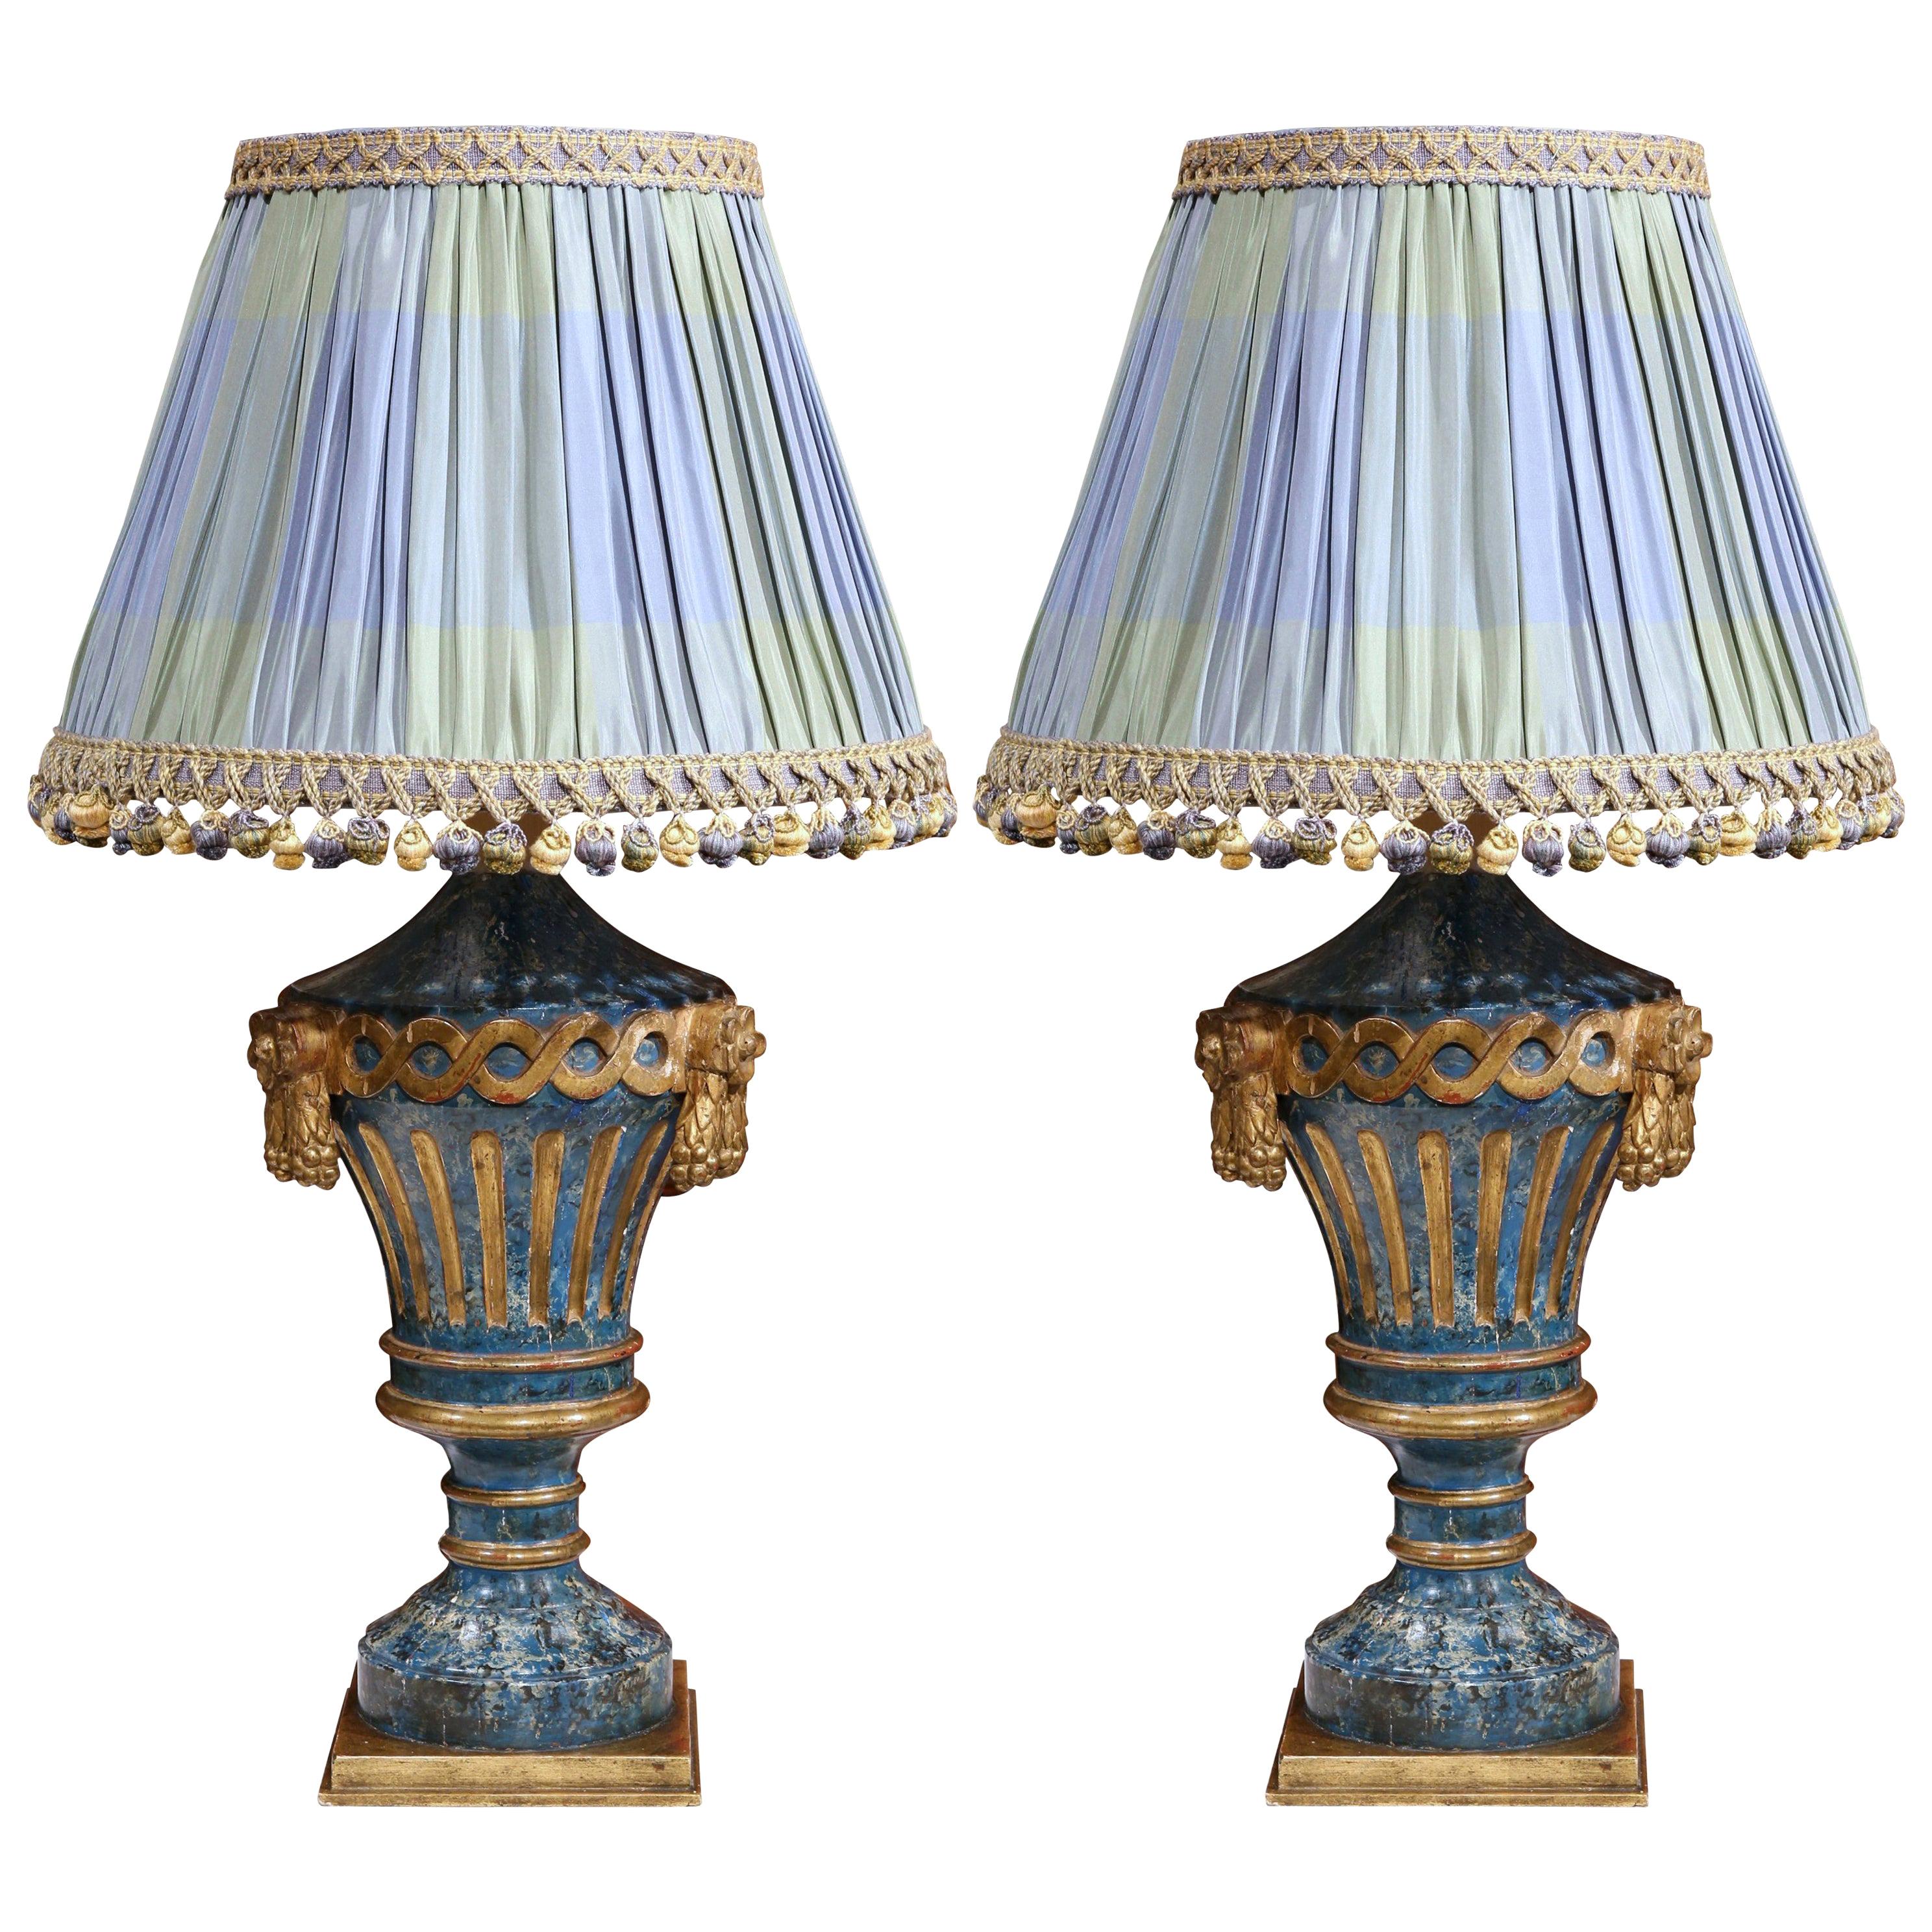 Pair of 19th Century Italian Carved Painted Lamp Bases with Custom Silk Shades